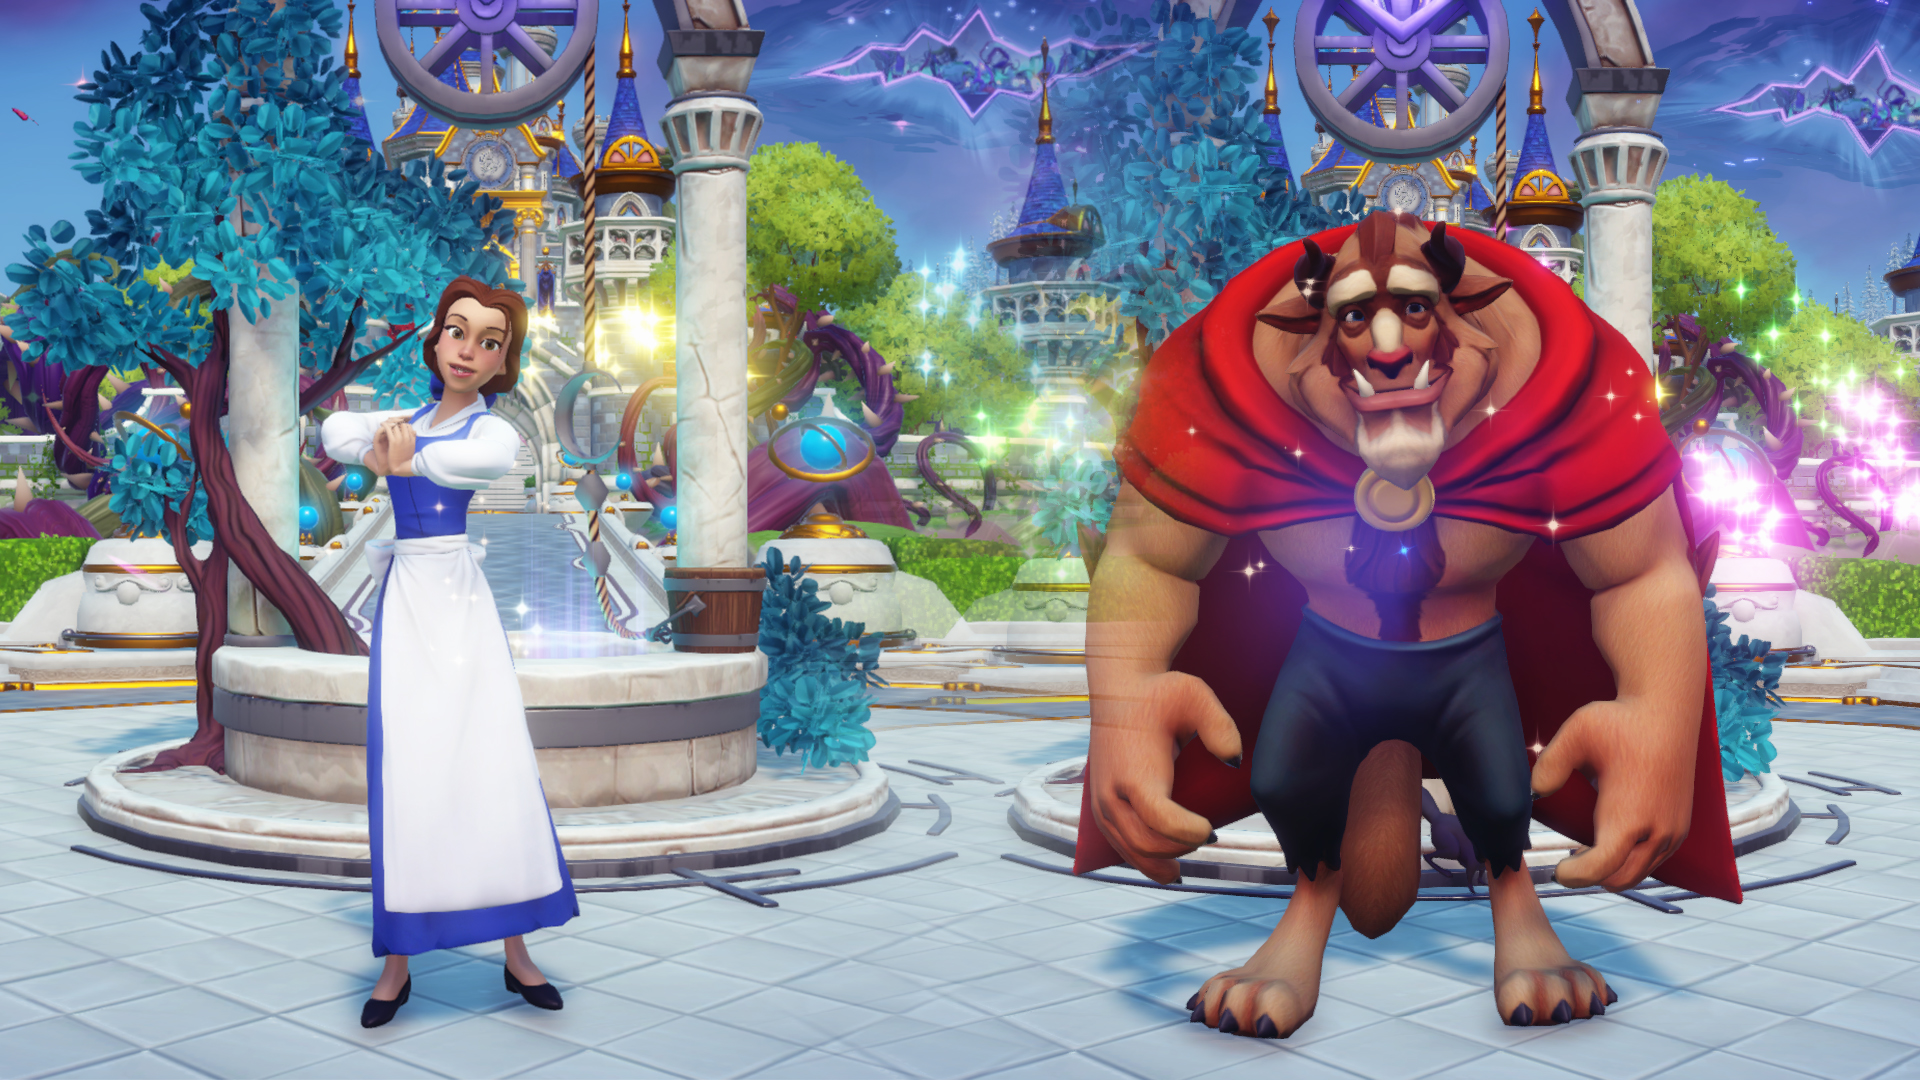 How to get Belle & the Beast in Disney Dreamlight Valley